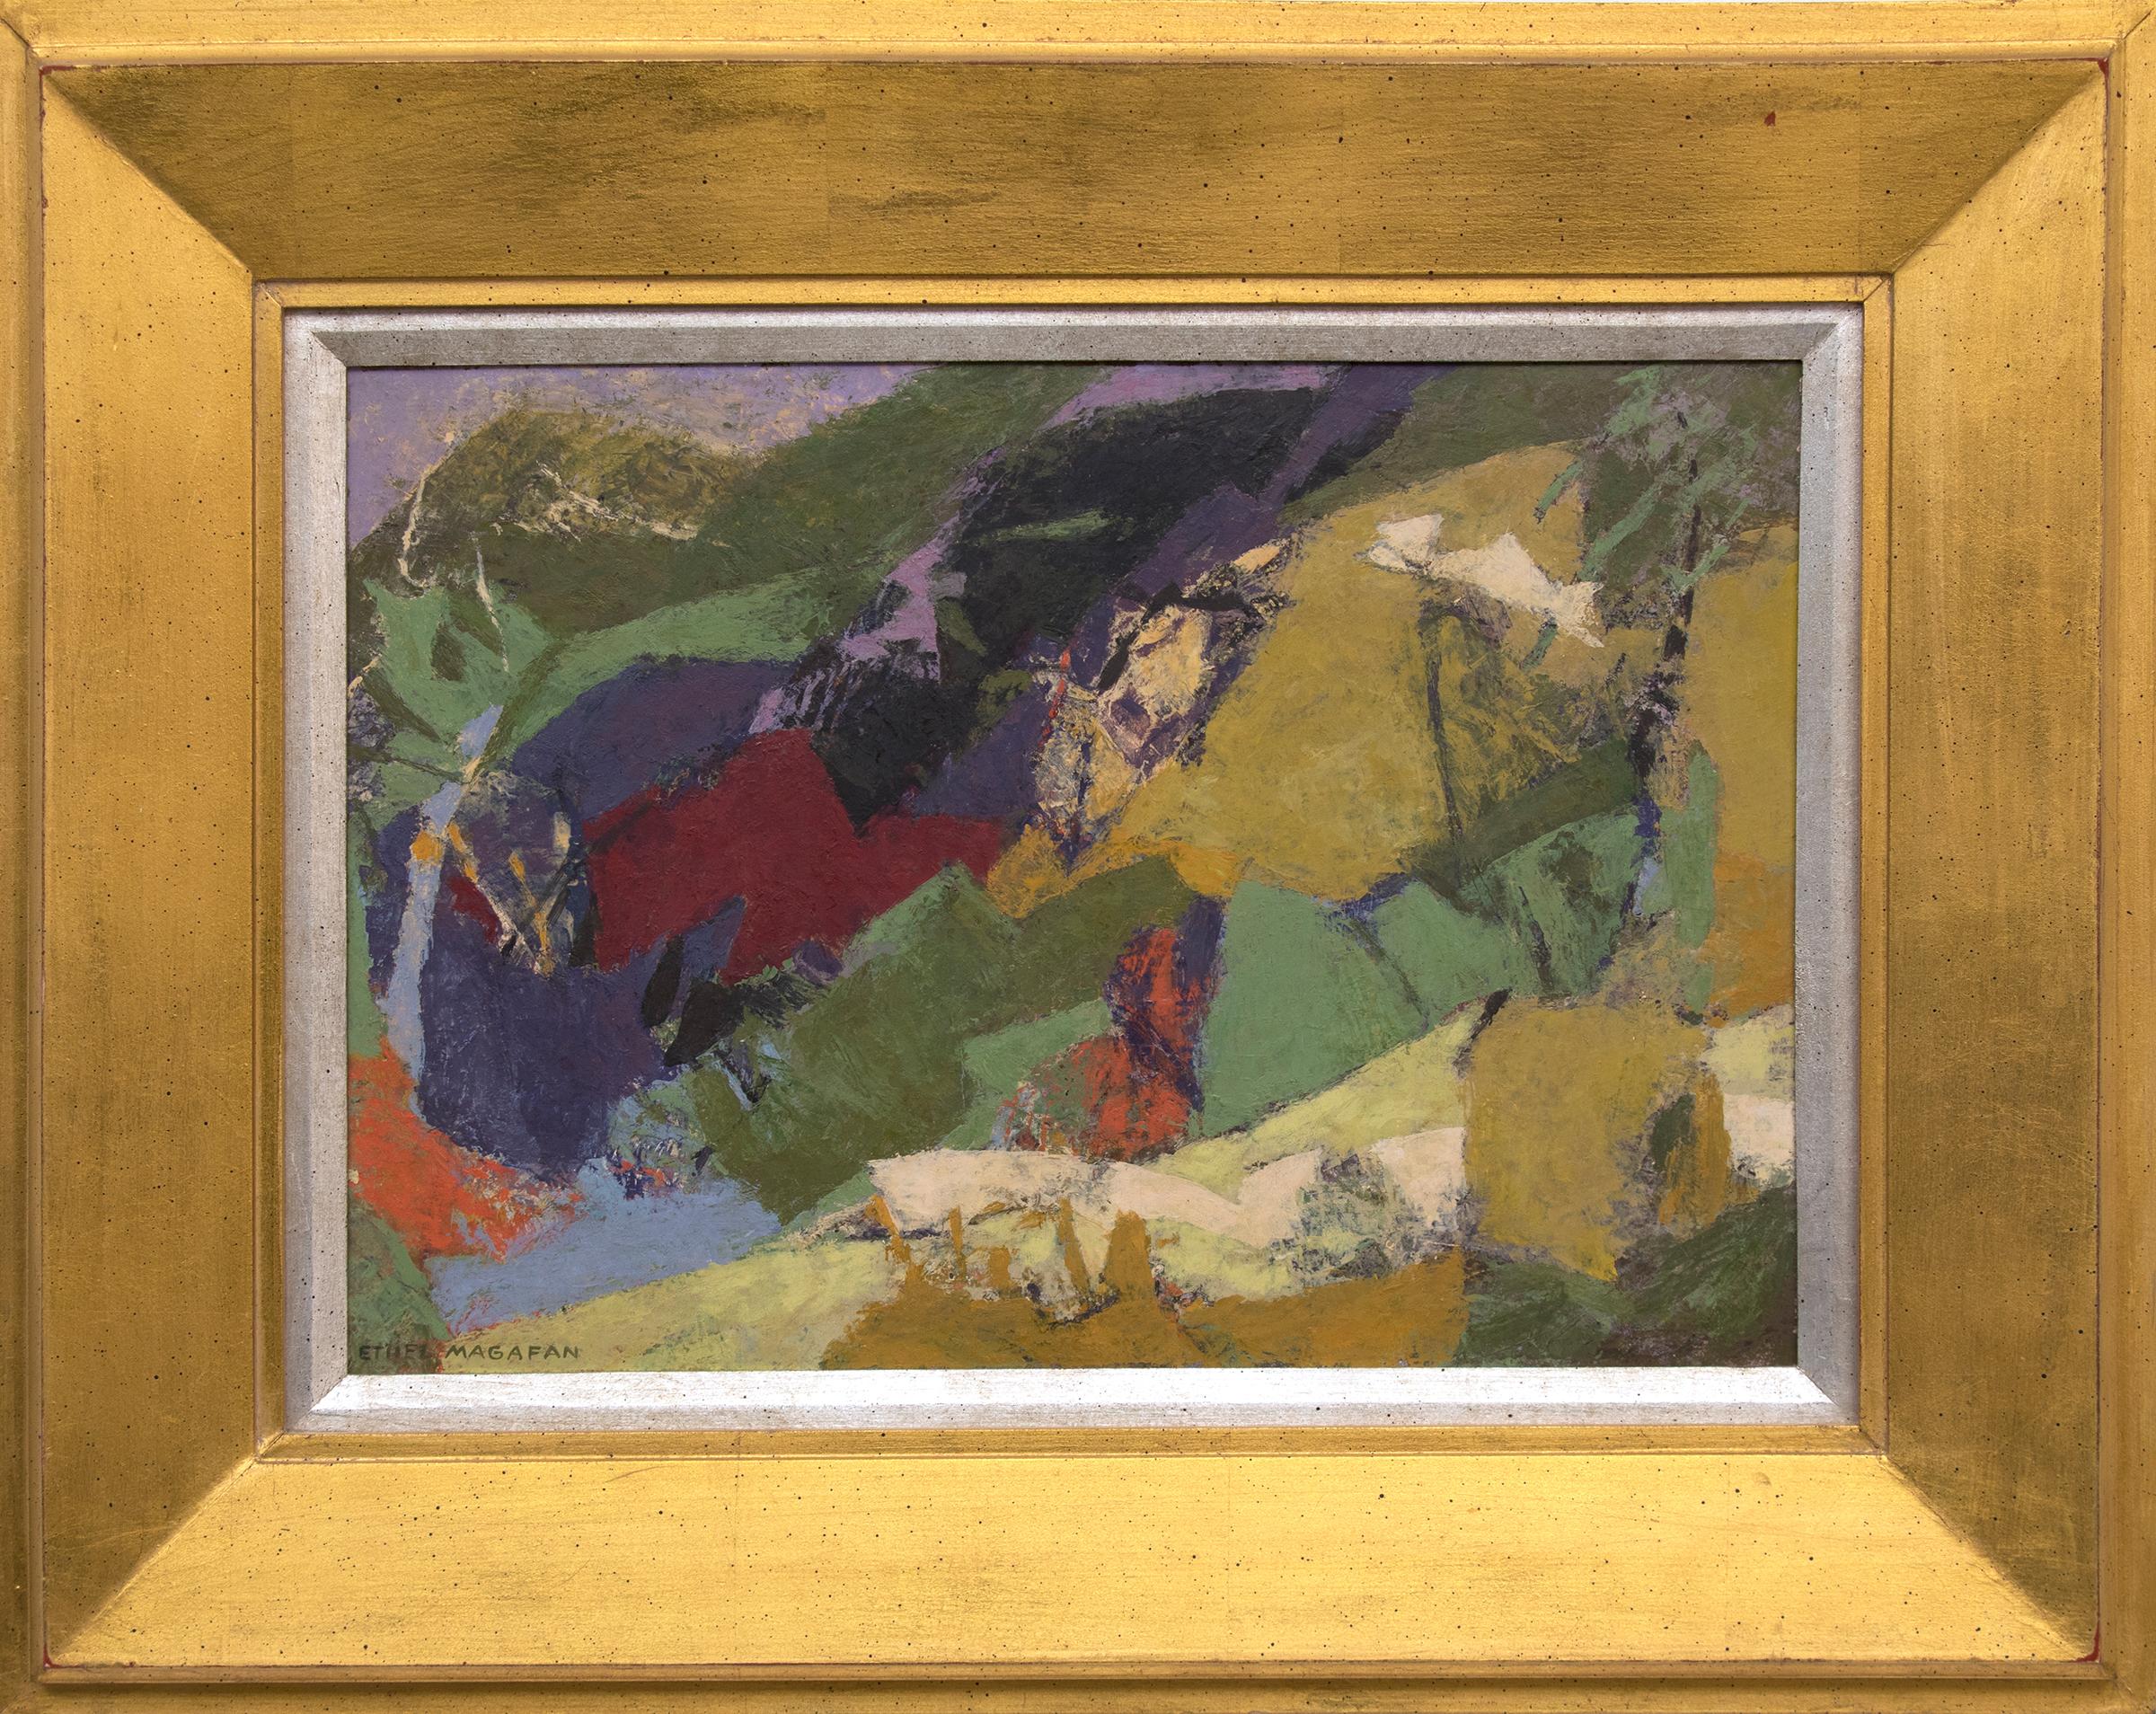 Ethel Magafan Landscape Painting - Mountain Lake (Abstract Colorado Landscape in Green, Gold, Red, Purple, Orange)